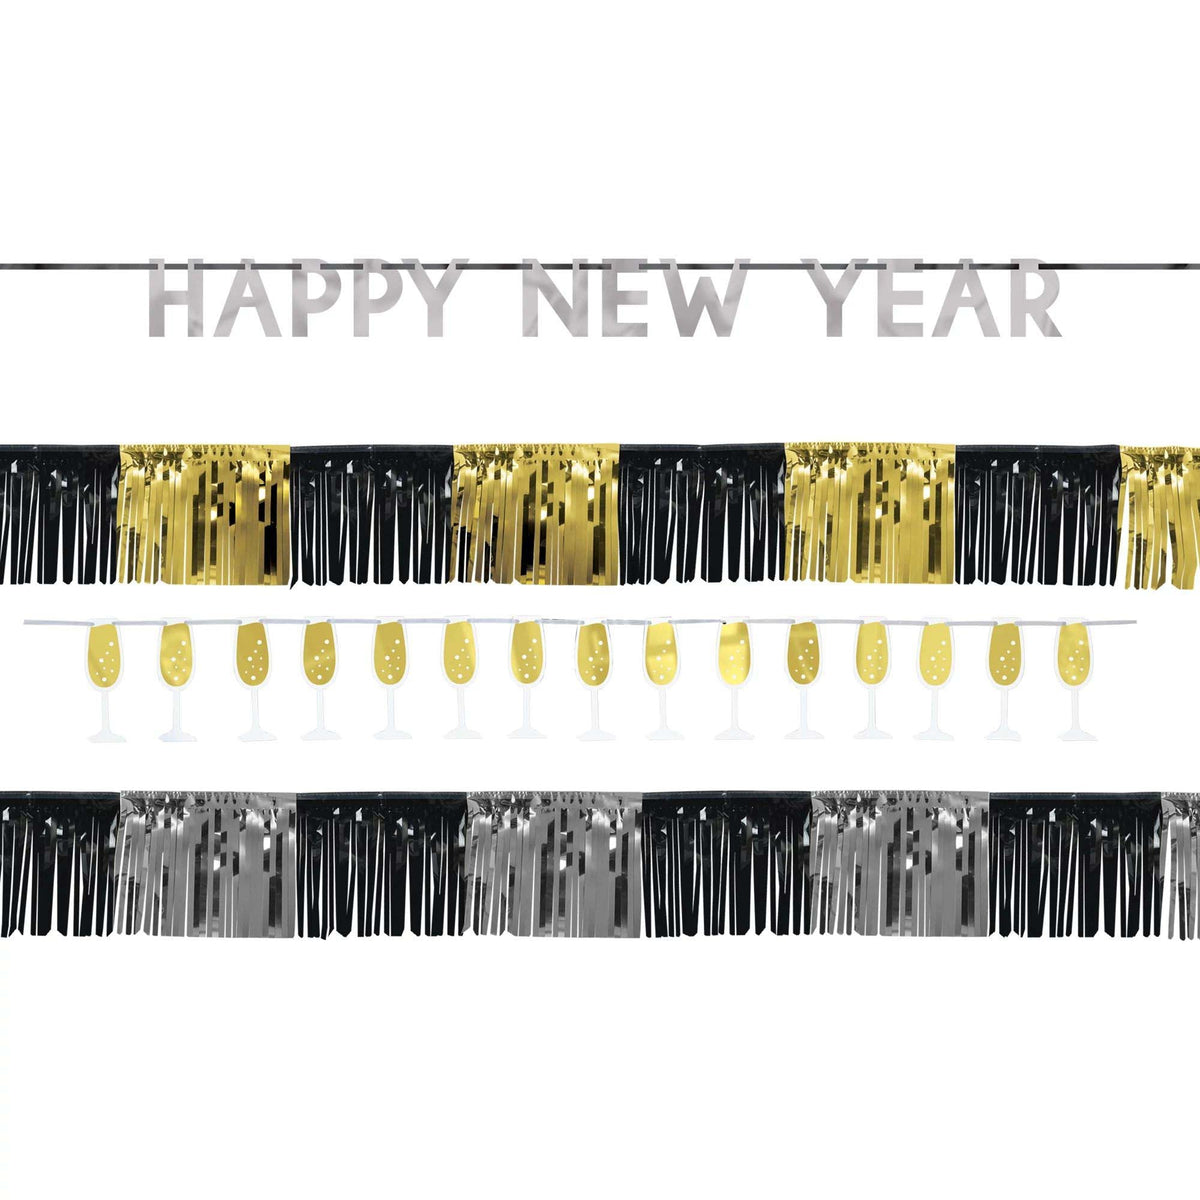 AMSCAN CA New Year Happy New Year Foil Banner Kit, 4 Count